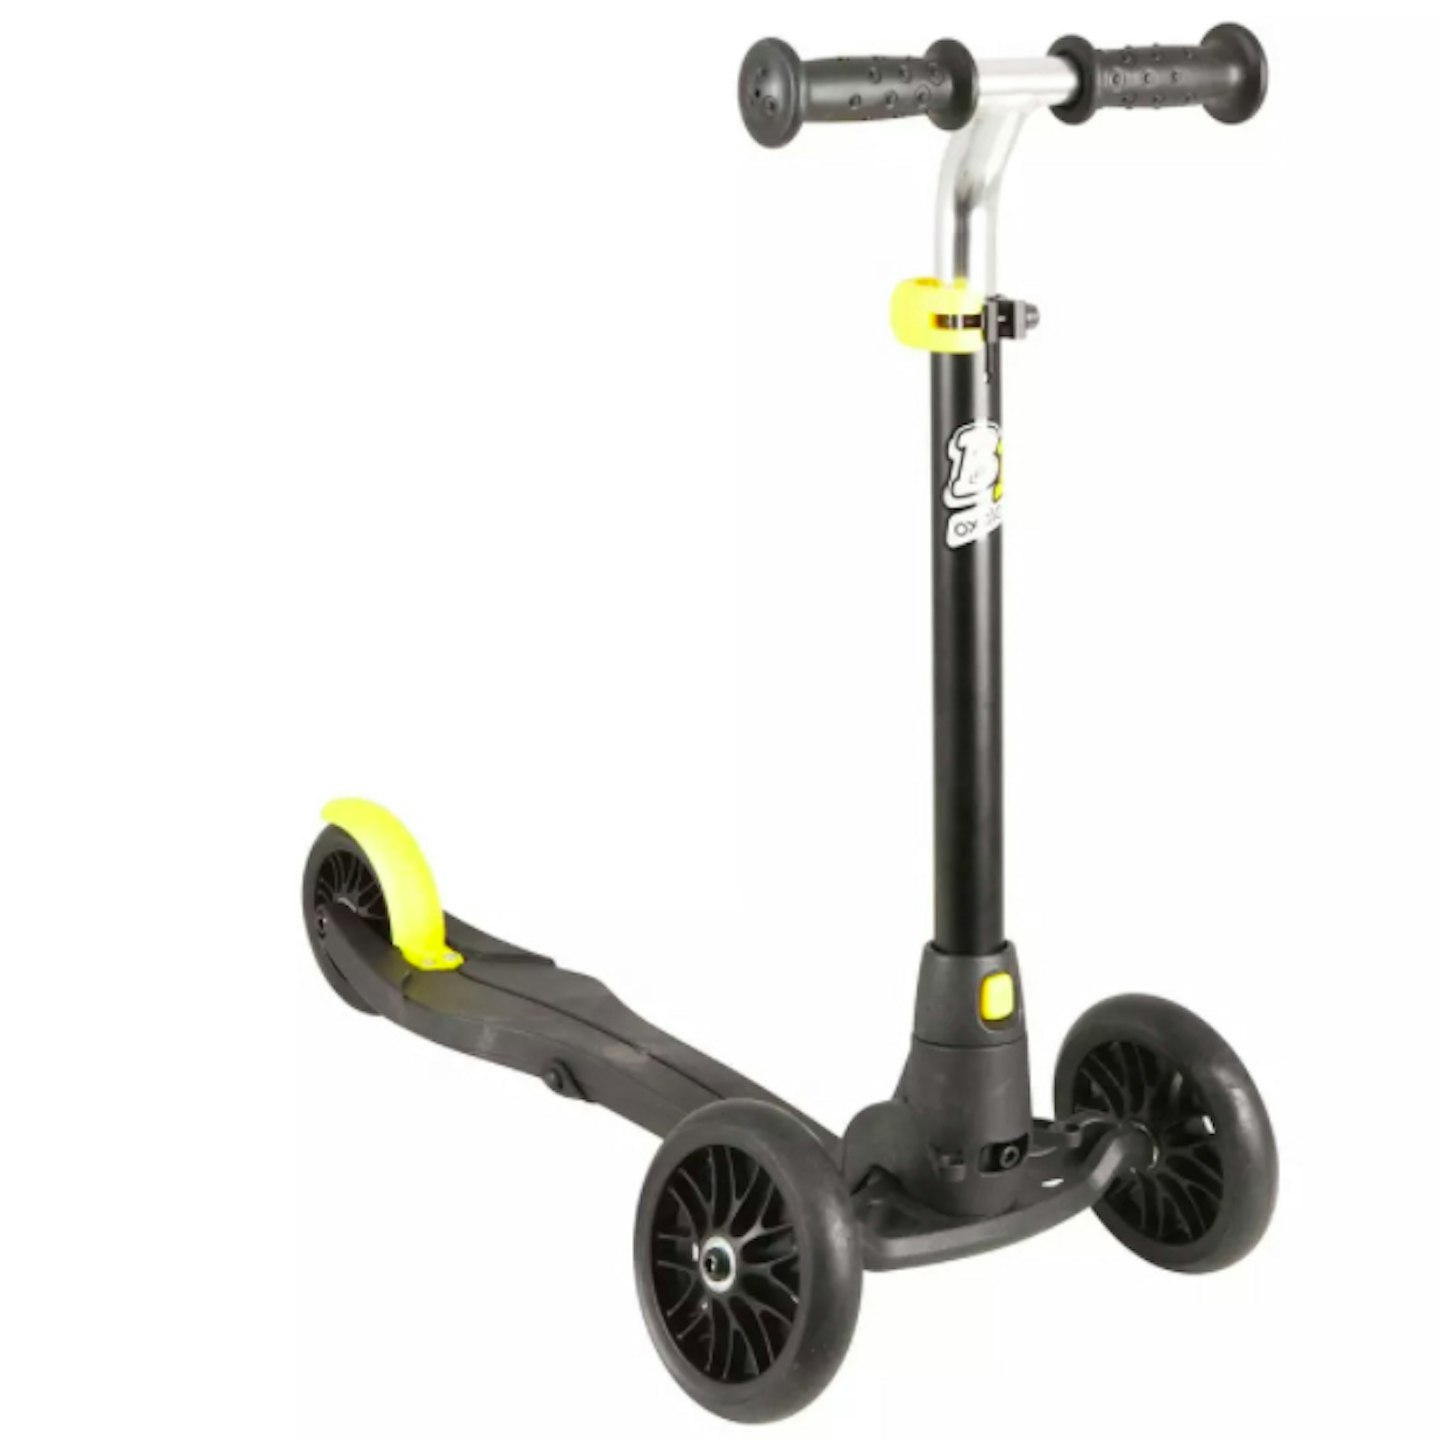 Oxelo B1 Kids' Scooter